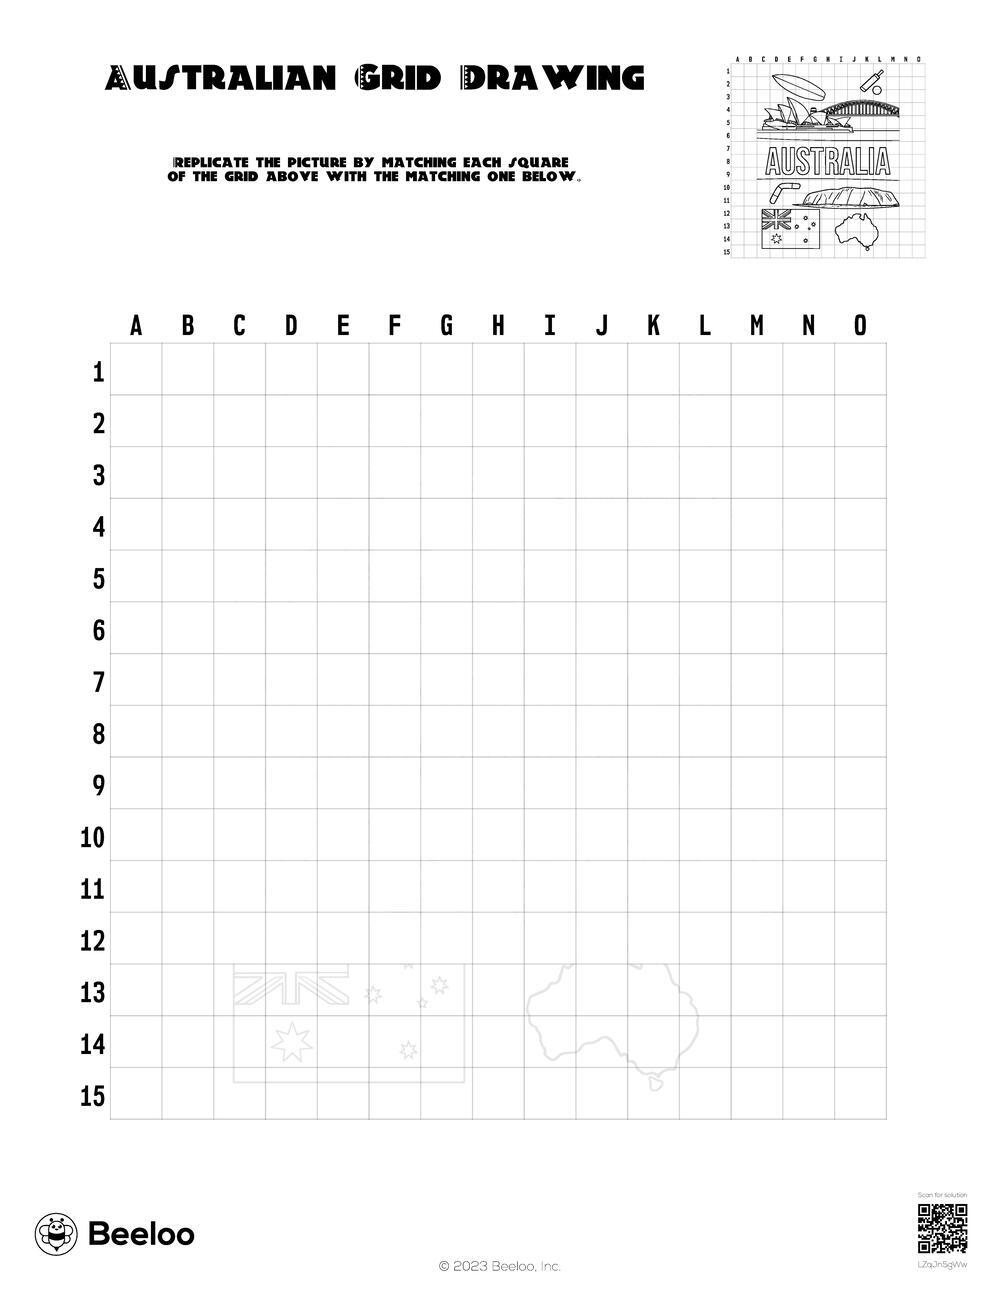 Australian grid drawing â printable crafts and activities for kids